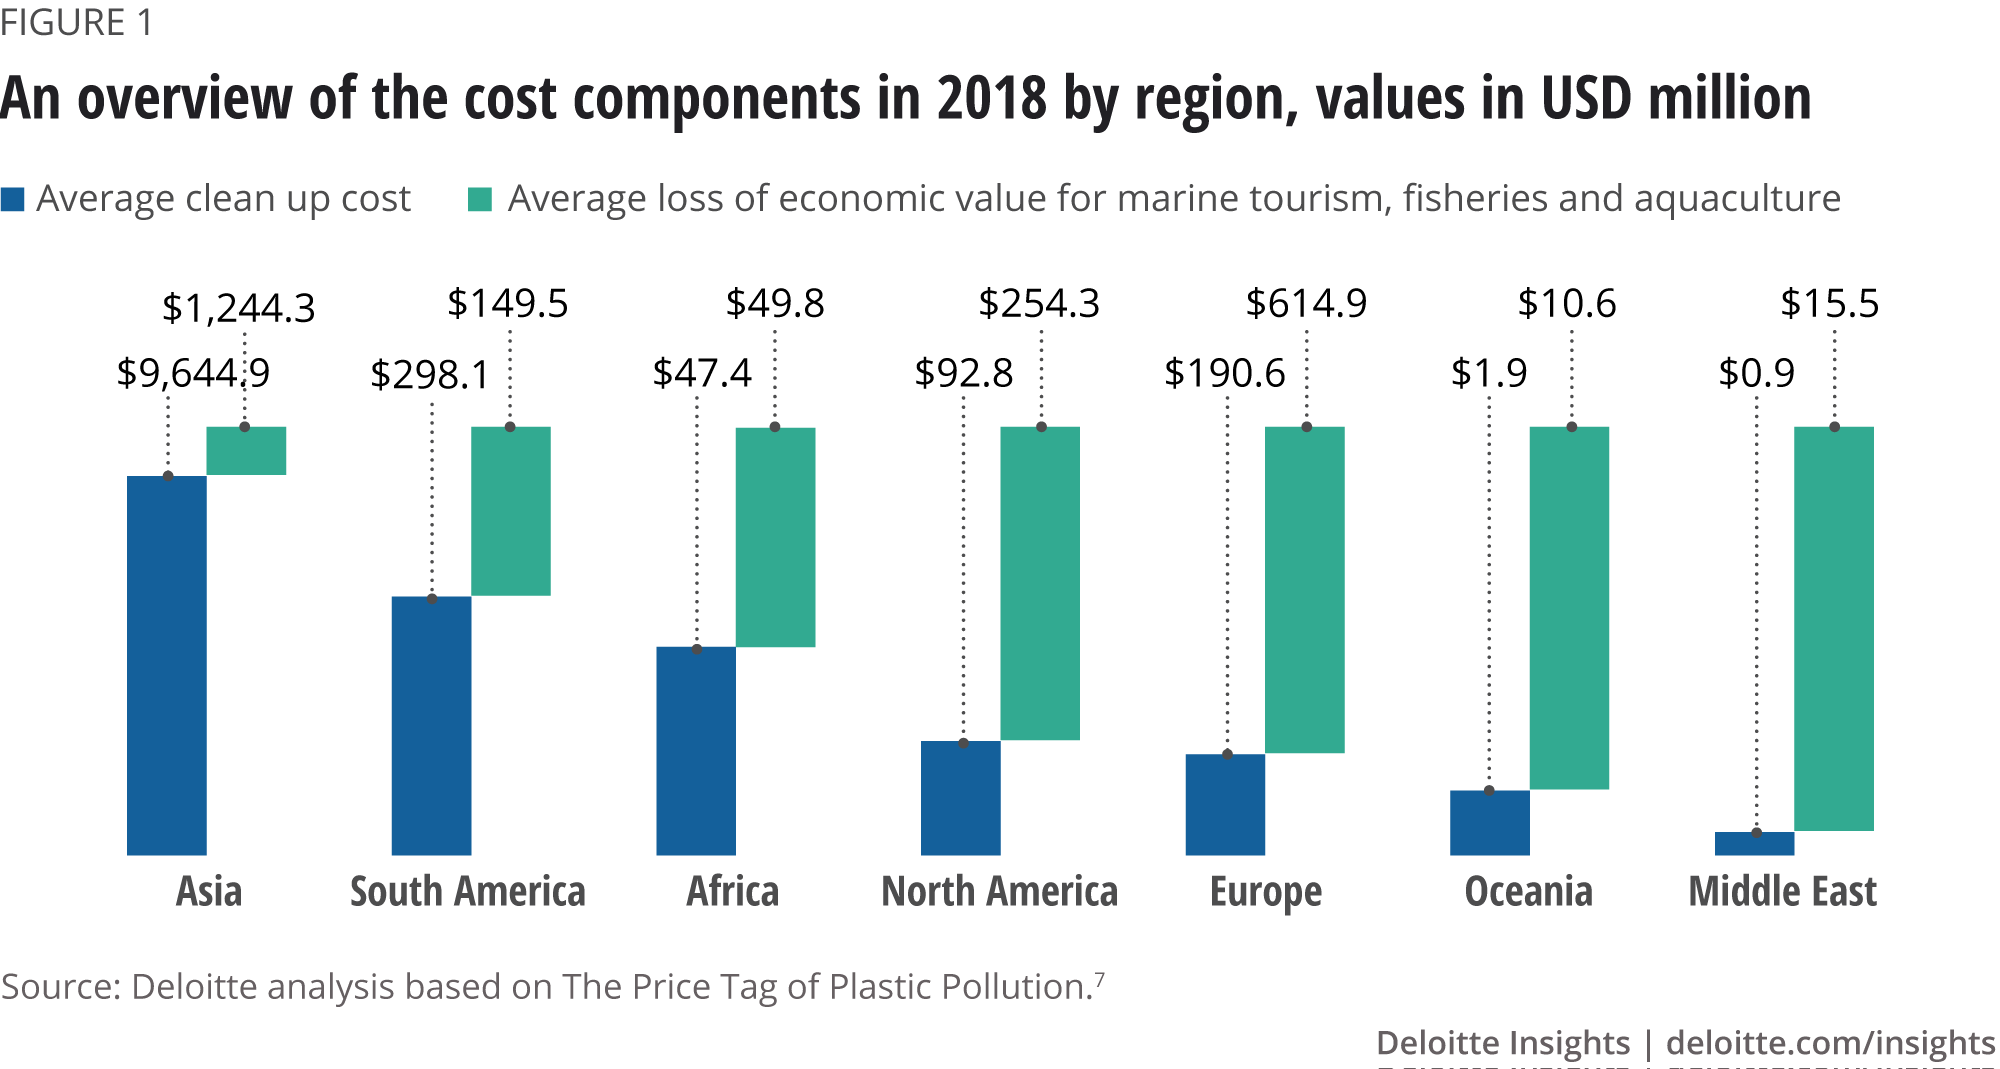 An overview of the cost components in 2018 by region, values in USD million